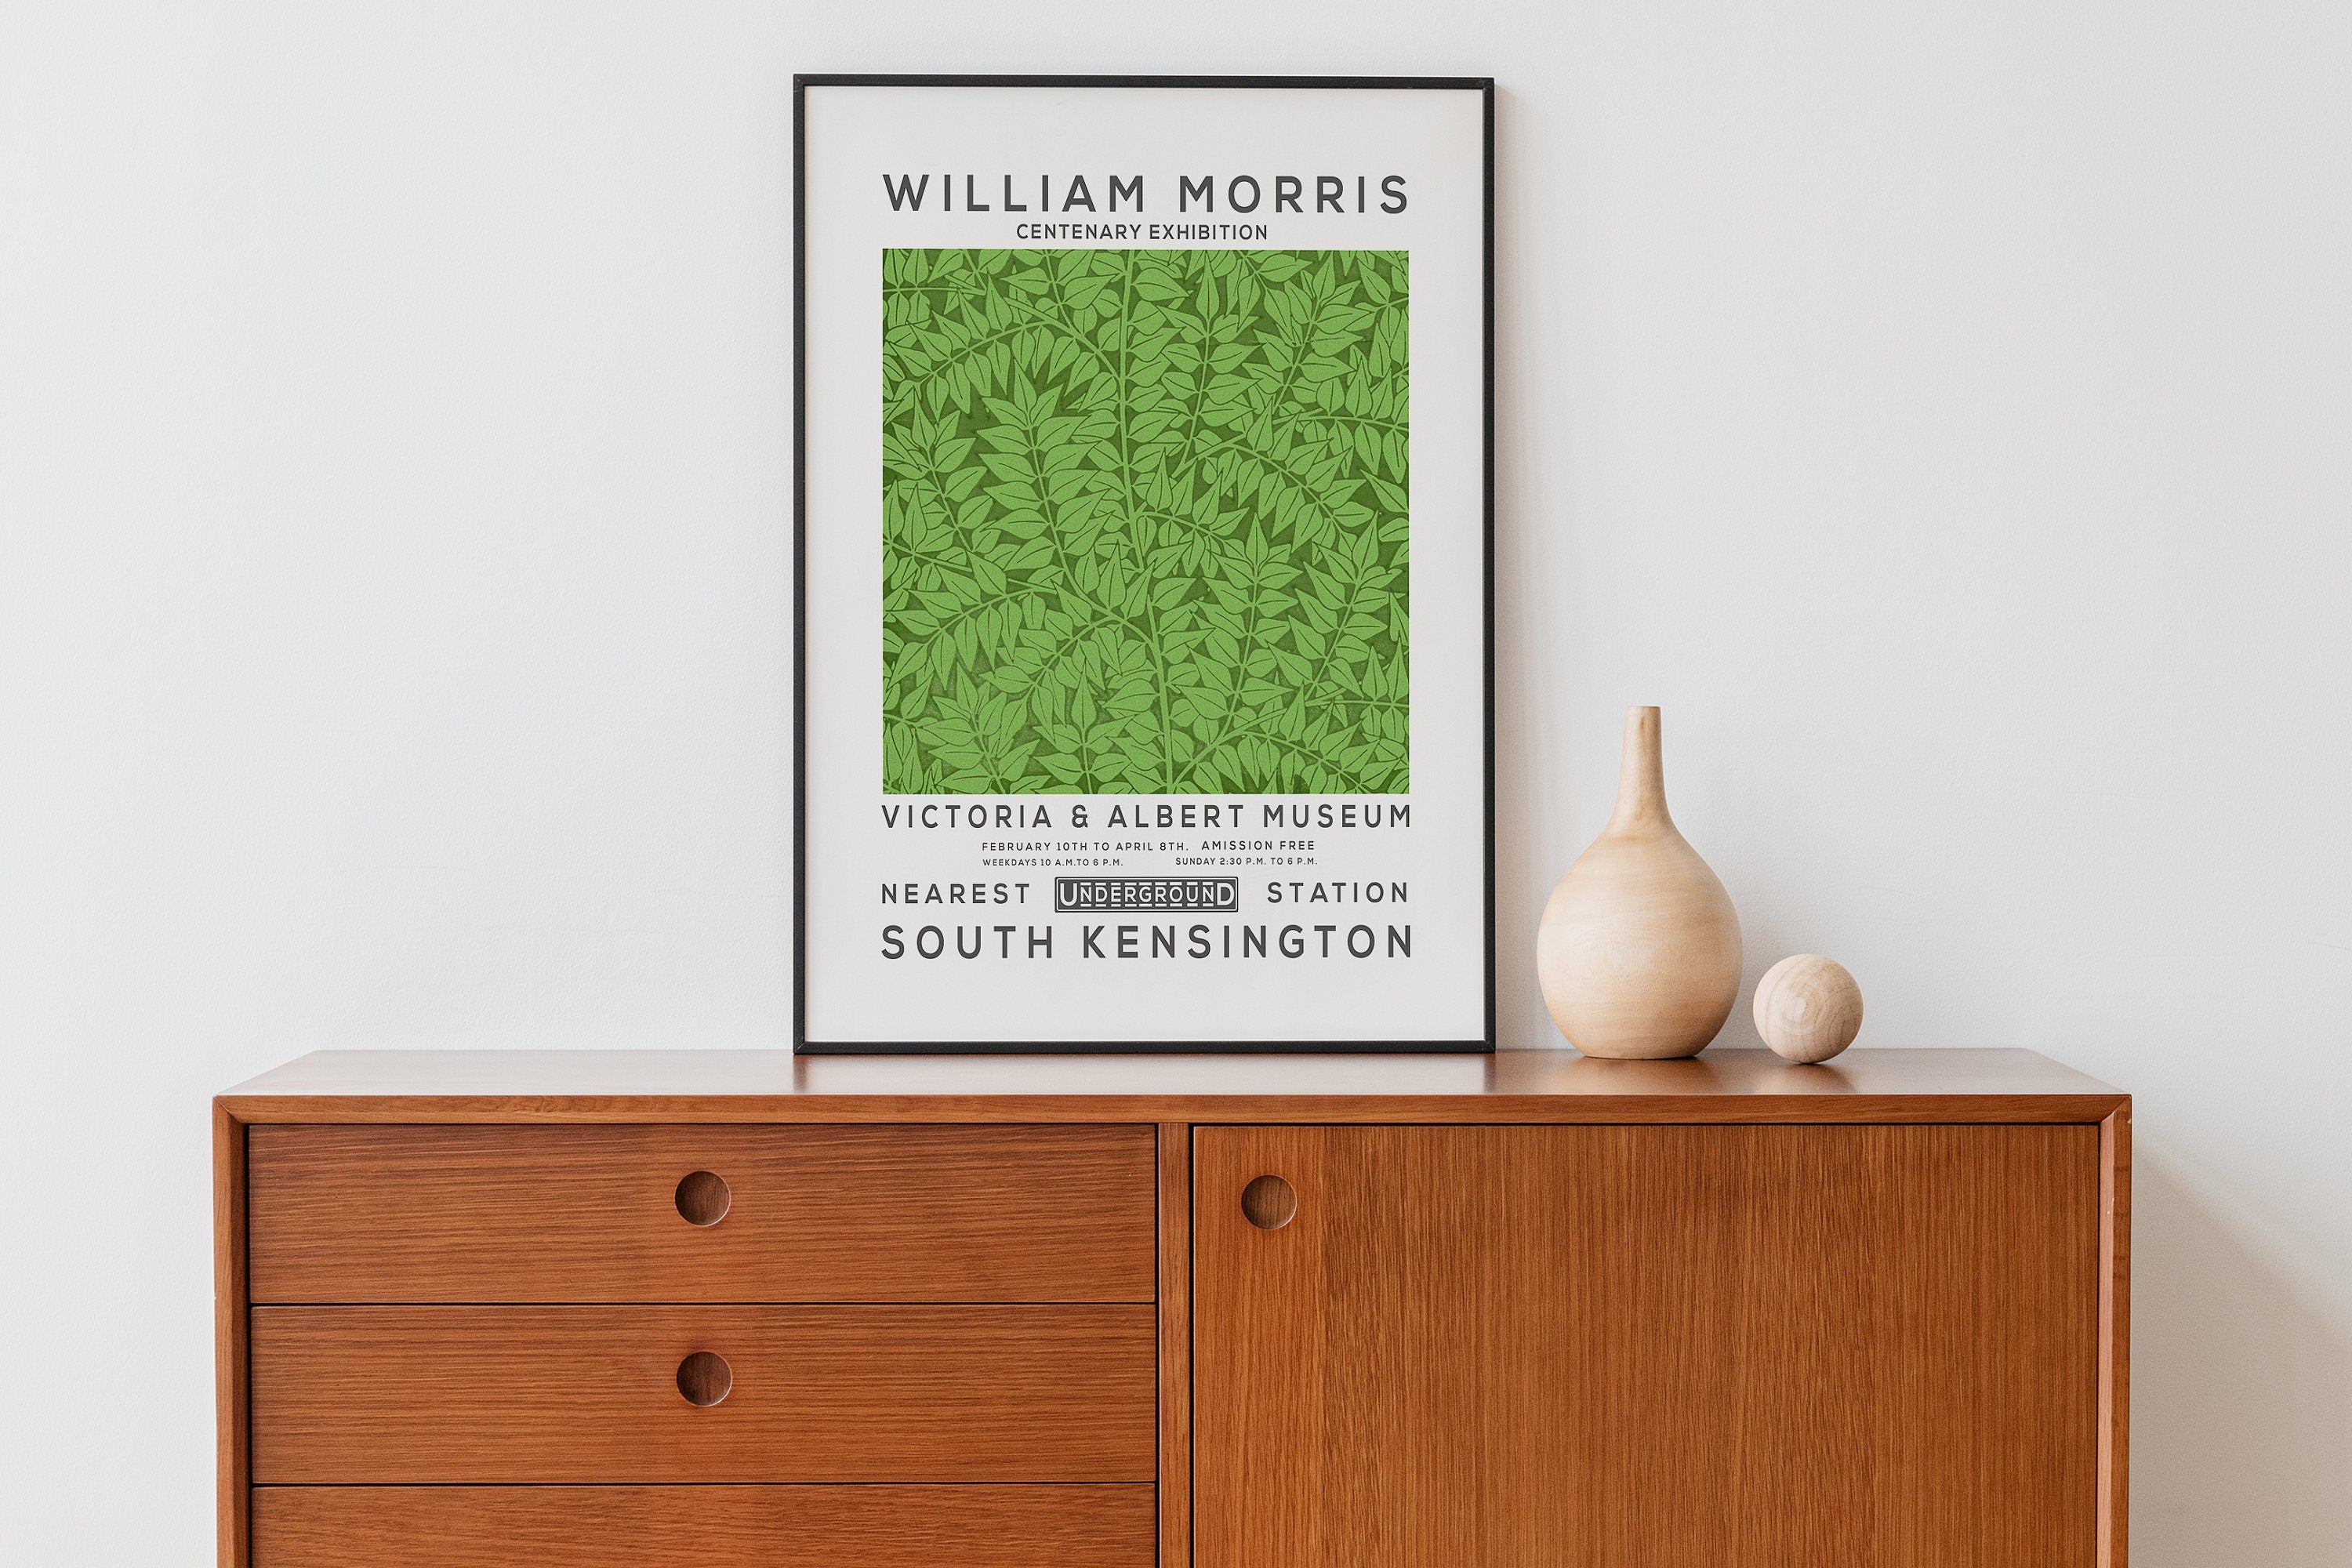 William Morris Print, Vintage Wall Decor, Exhibition Poster, Floral Wall Art, Flower Print, Home Decor, Green leaves